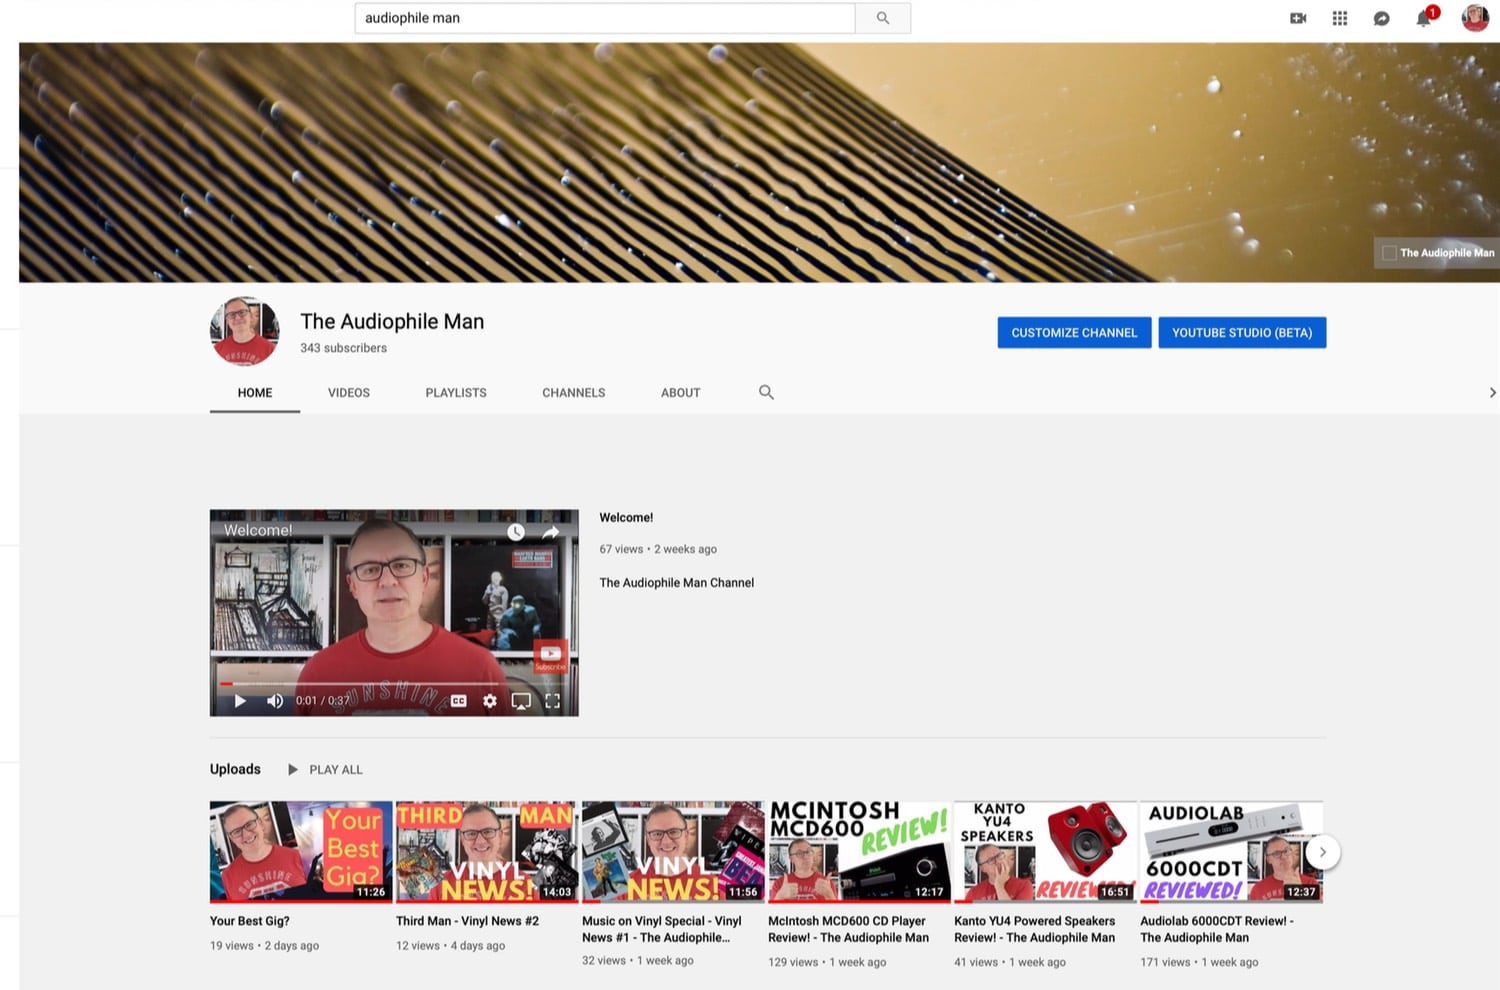 YOUTUBE : NEW OFFICIAL 'AUDiOPHILE MAN' CHANNEL LAUNCHED!